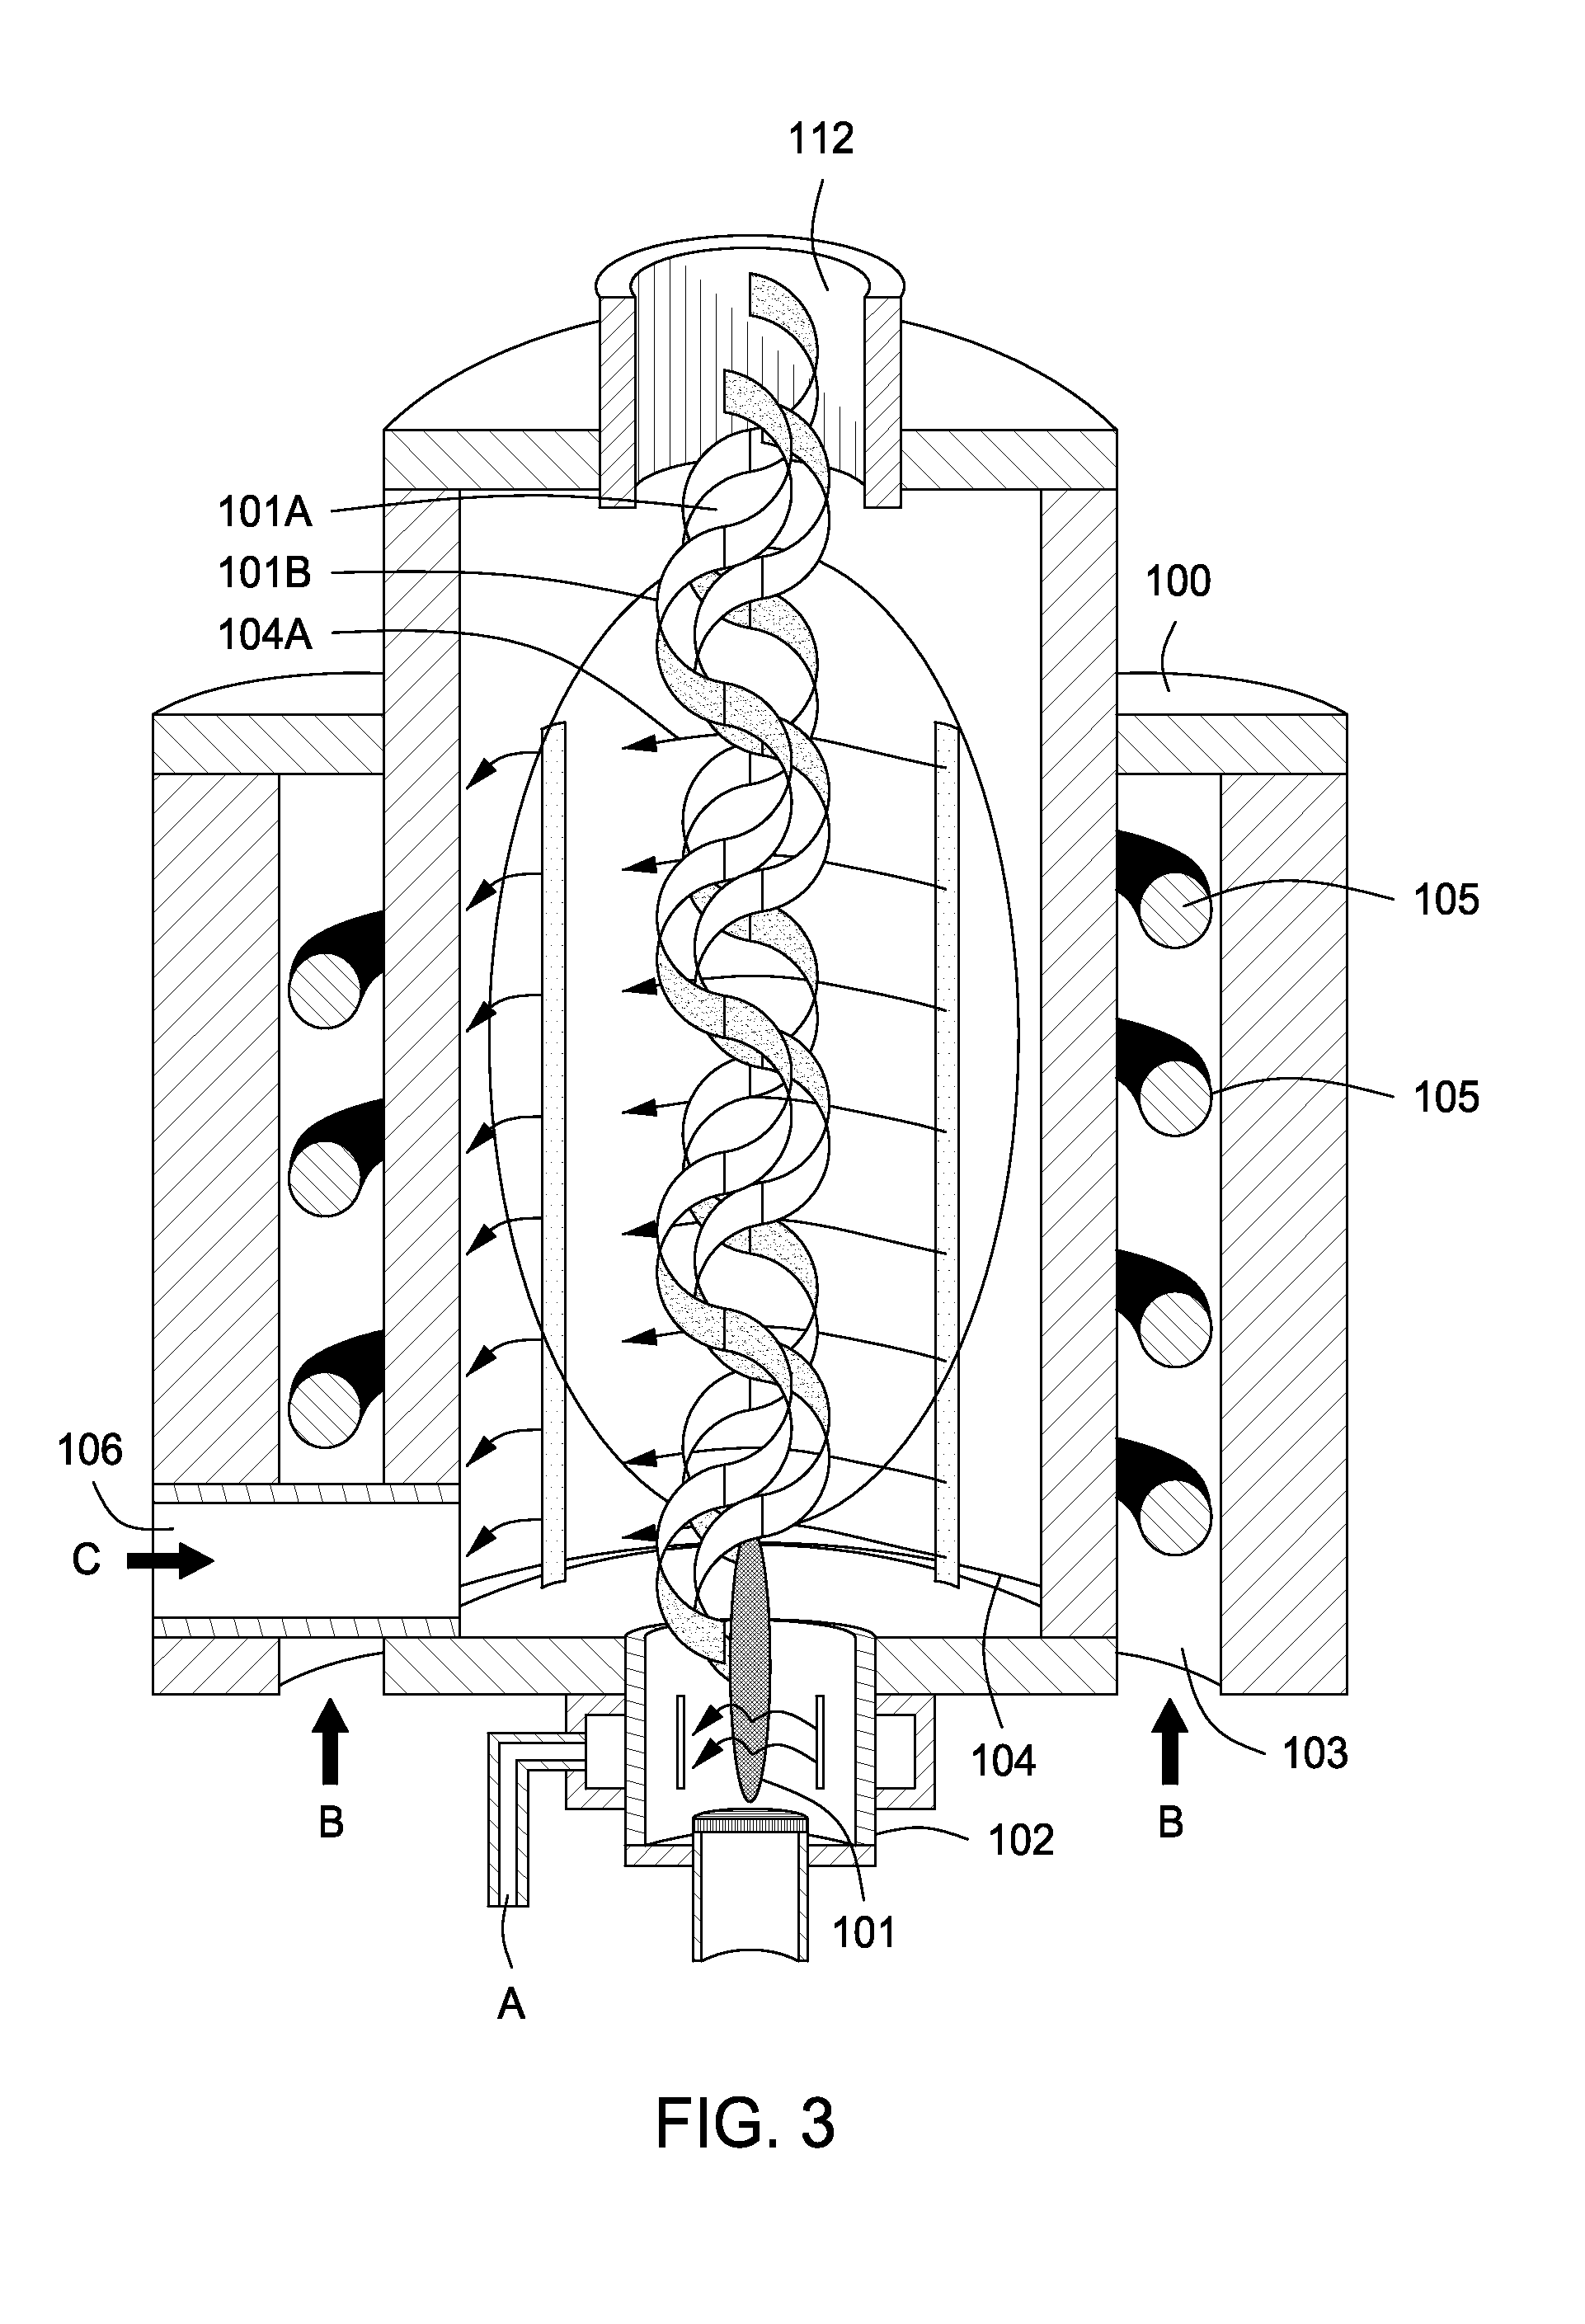 System, method and apparatus for treating liquids with wave energy from plasma